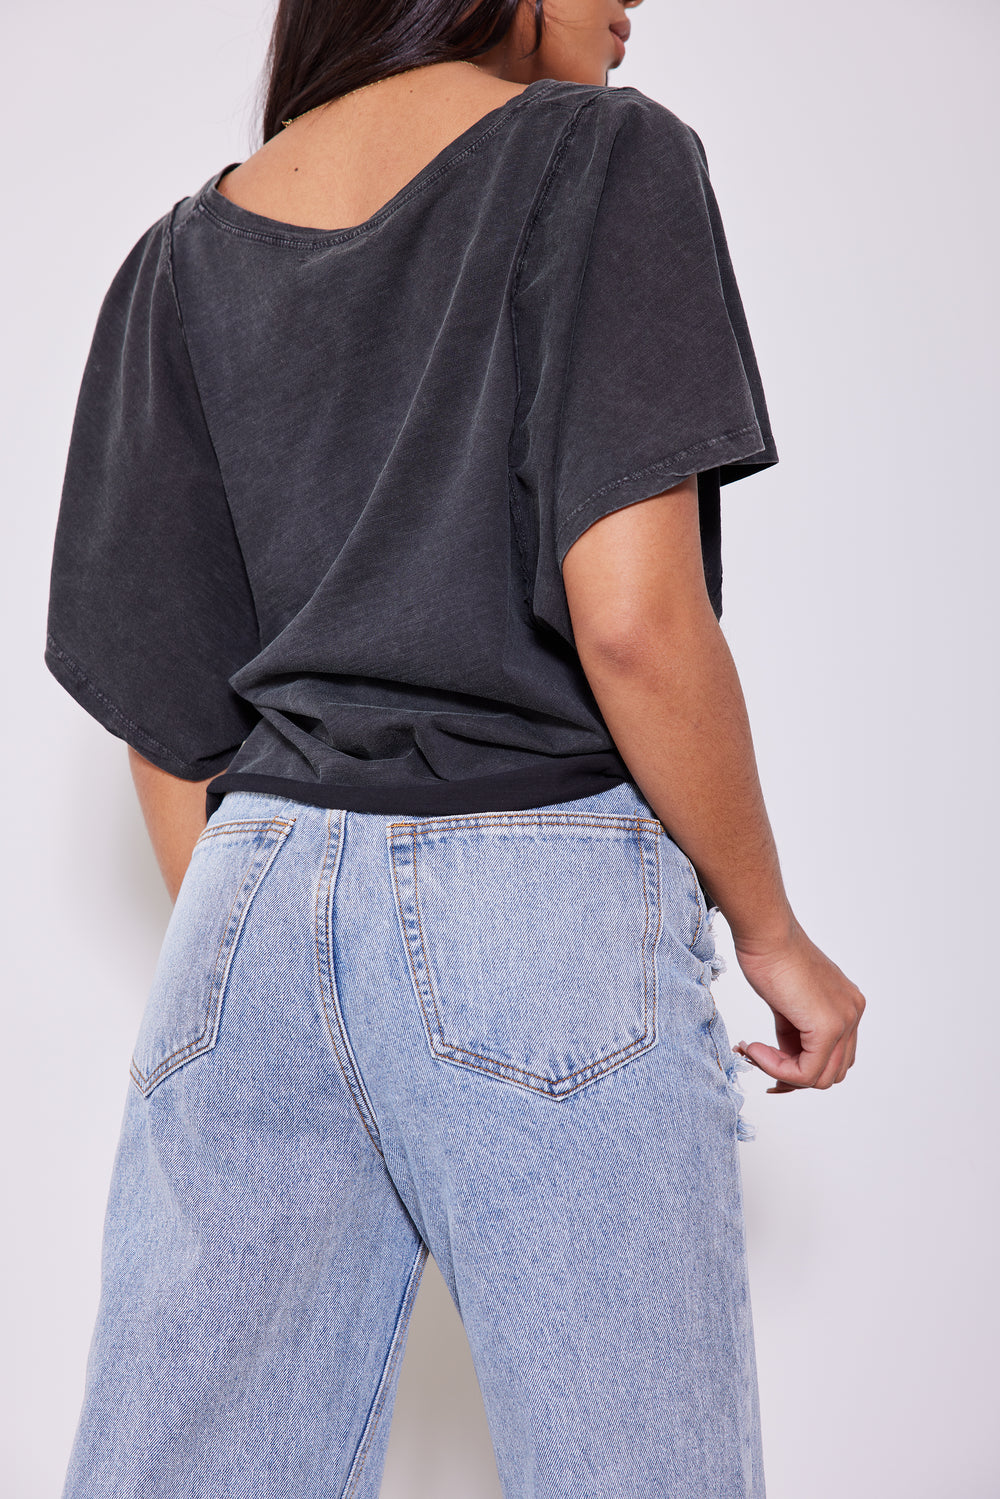 Not So Basic | Charcoal Tee